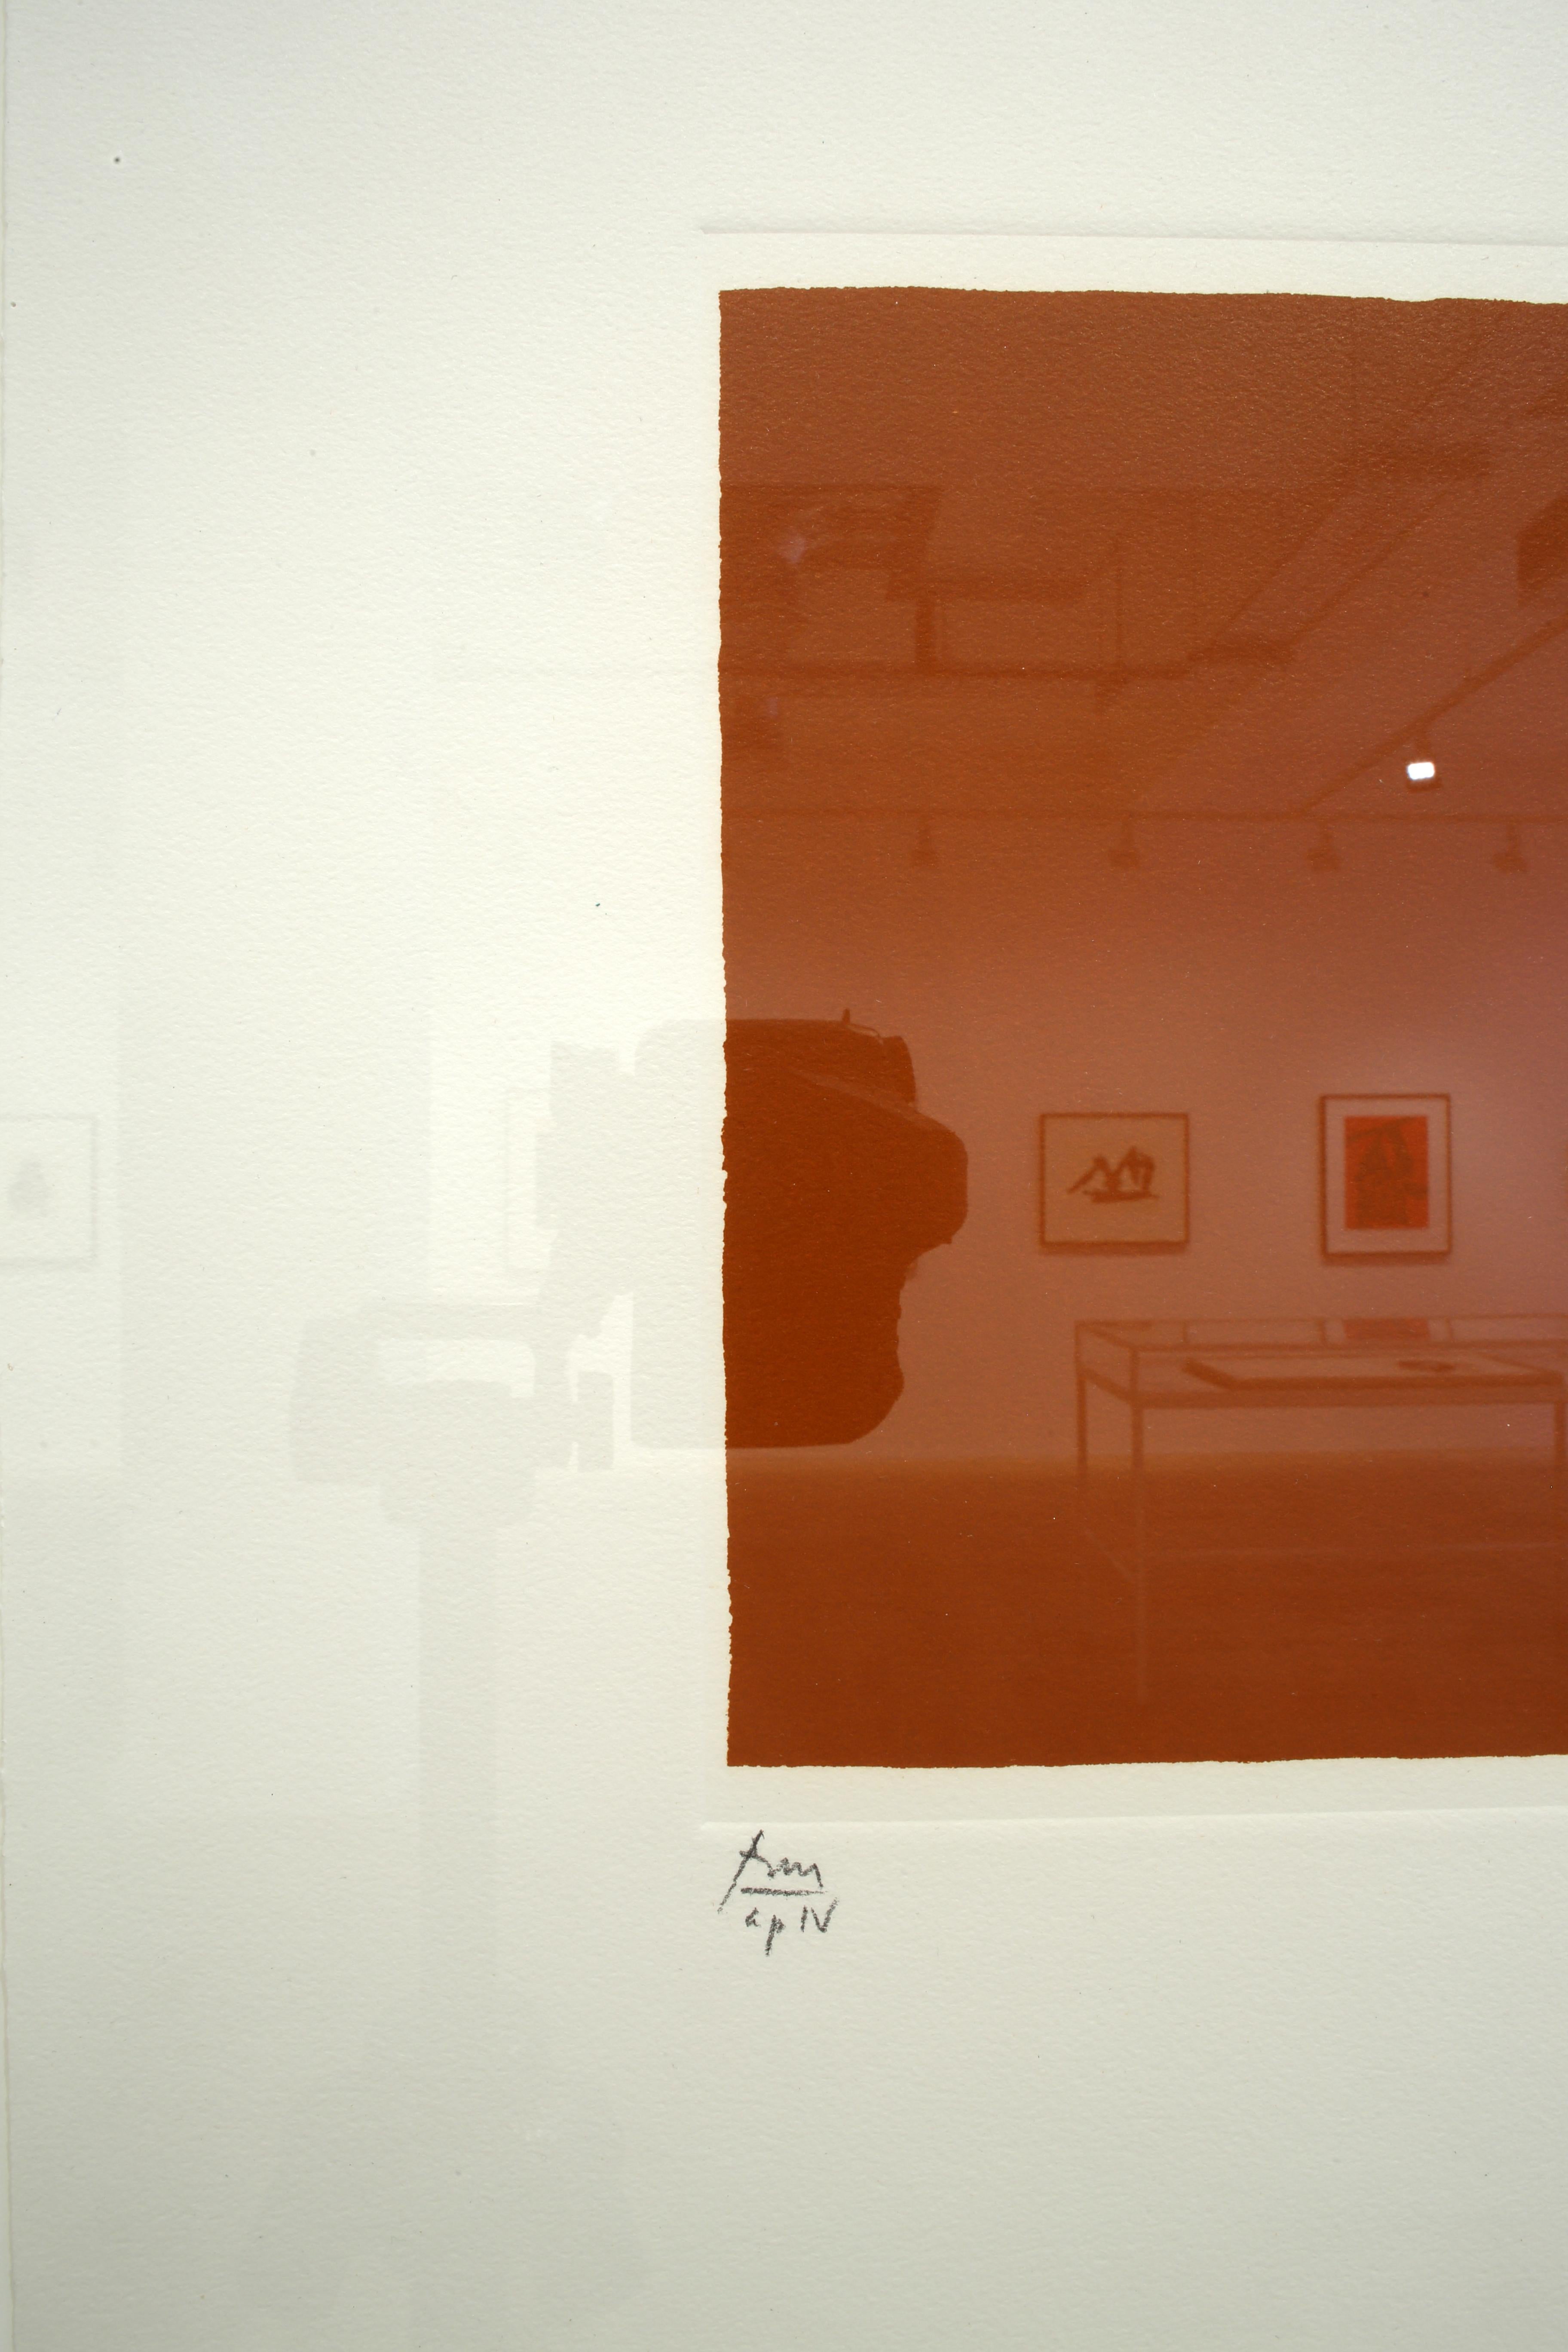 Robert Motherwell
Paris Suite III (Autumn)
1980
Lithograph on J.B. Green handmade paper, Edition of 60
49.2 x 56.8 cms (19 1/2 x 22 1/2 ins)
RM17035

CR 266

Signature:Signed 